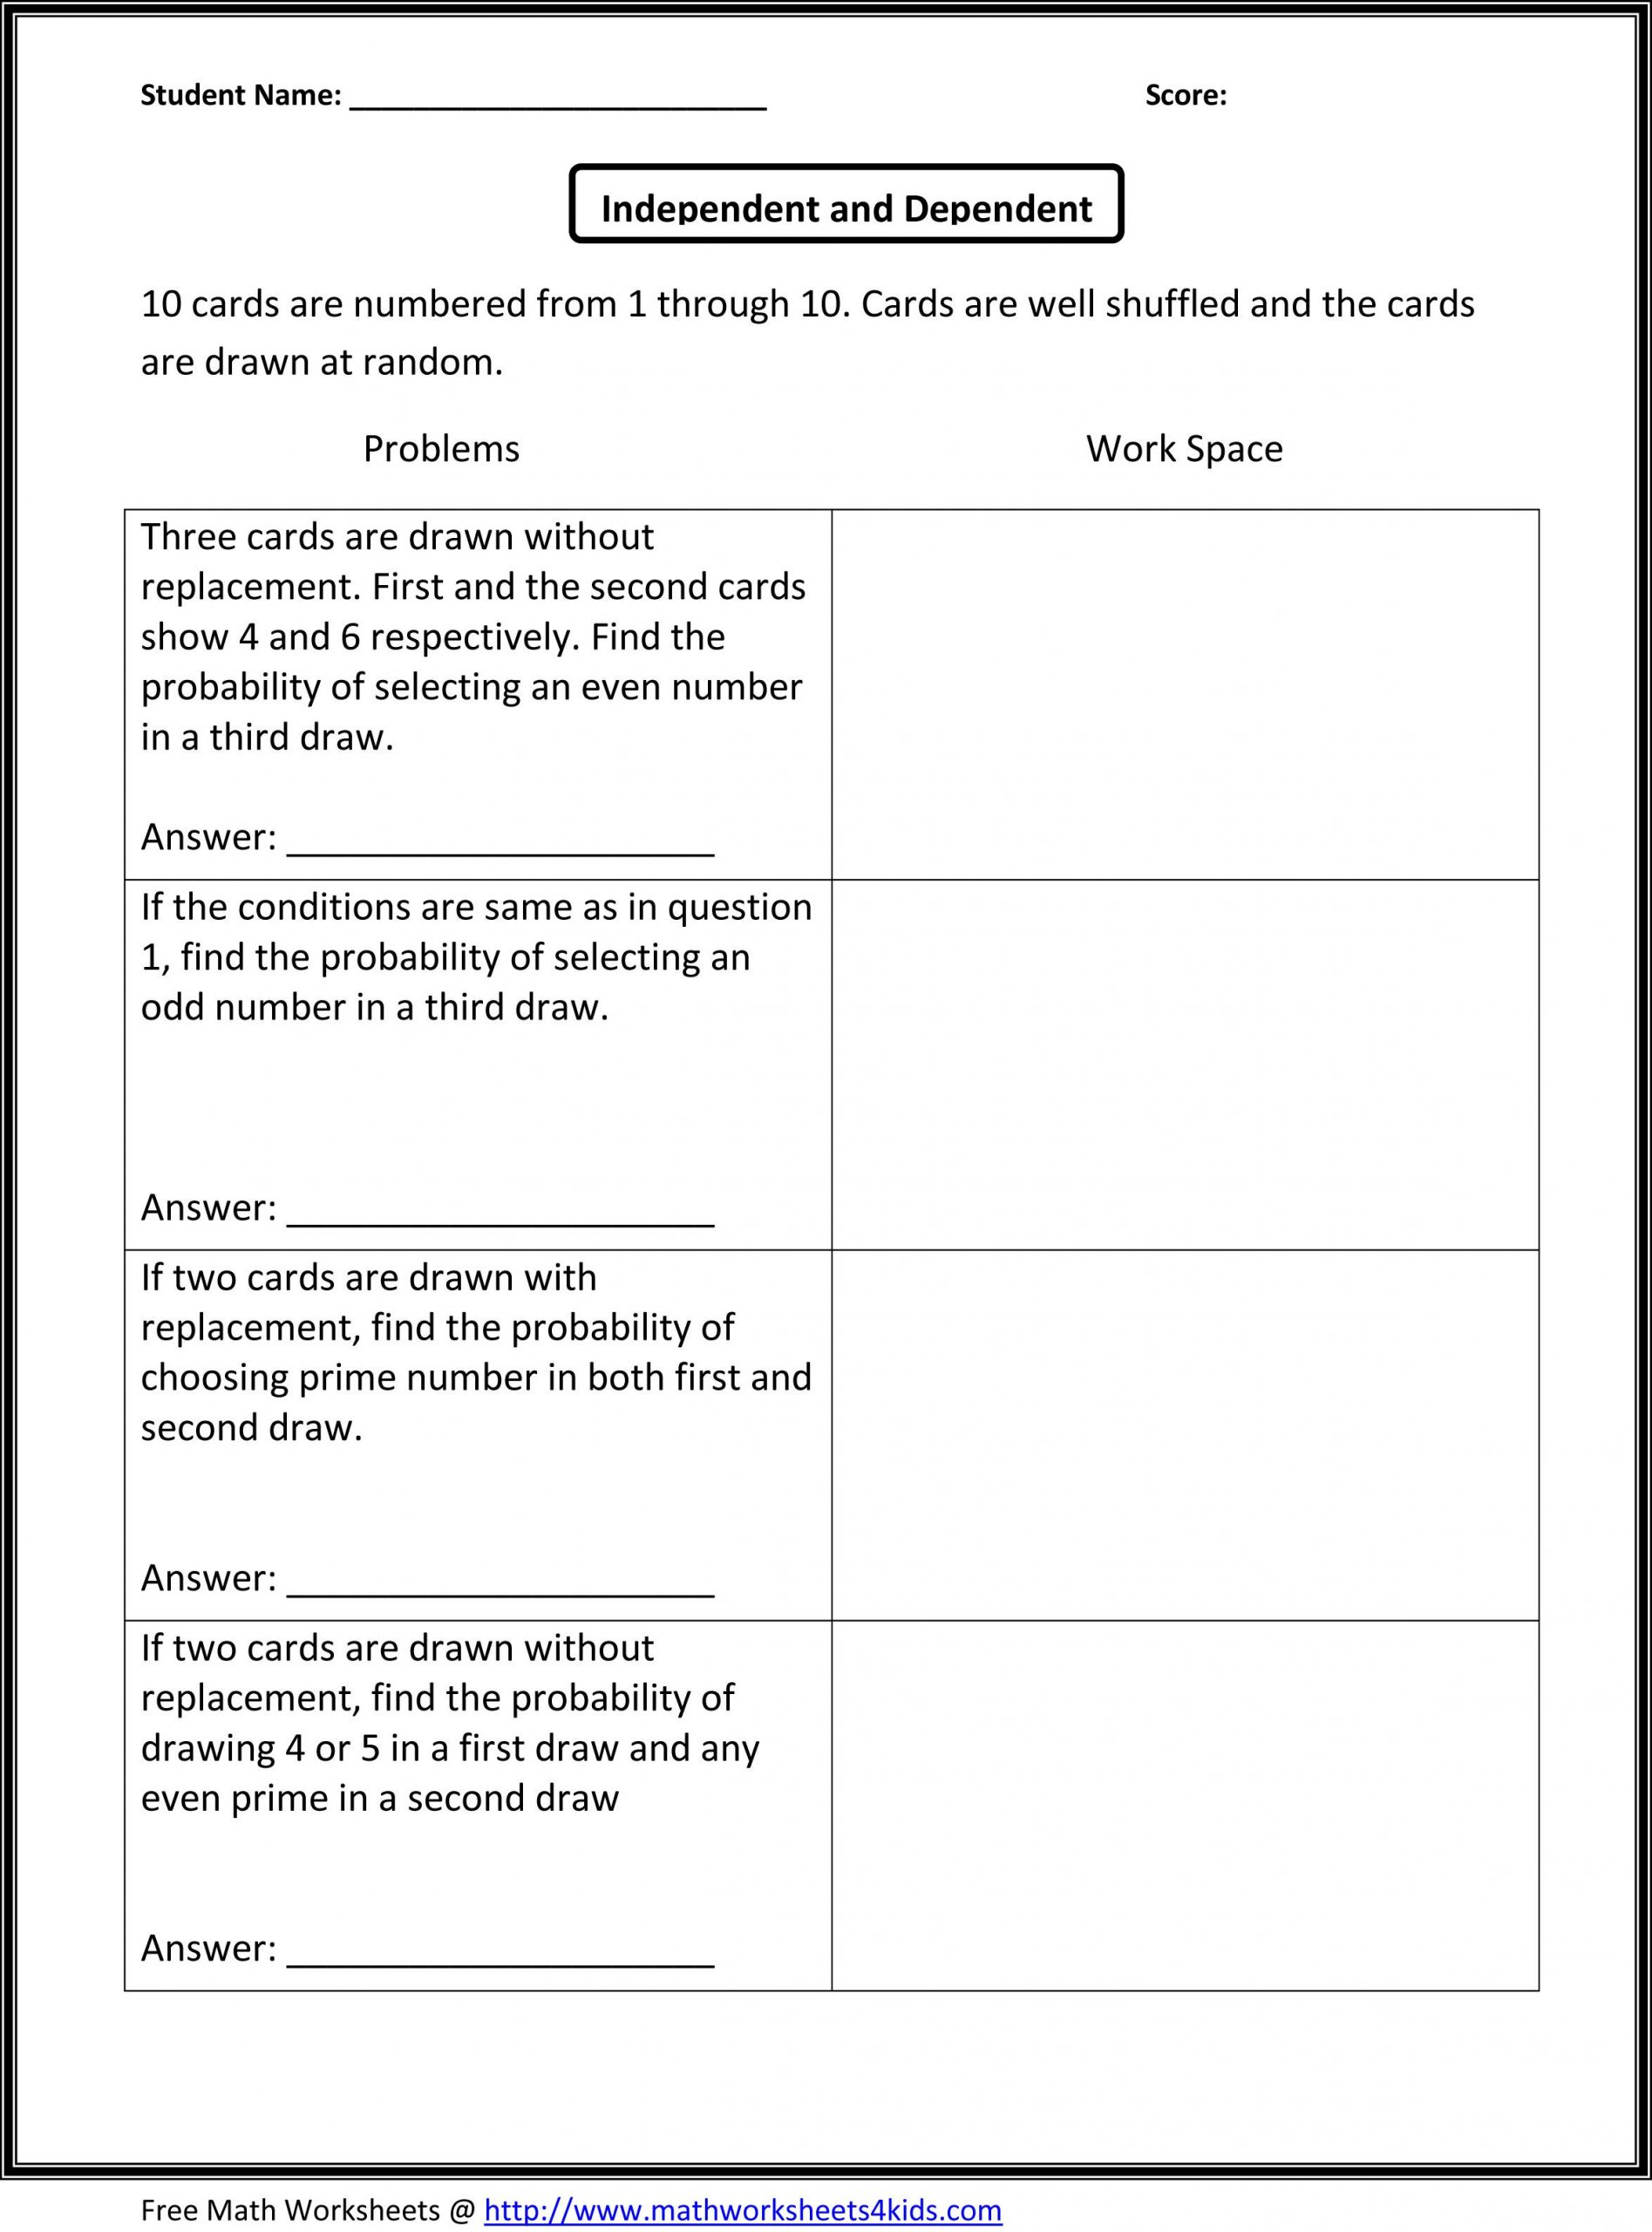 Probability Worksheet High School Probability Of Independent and Dependent events